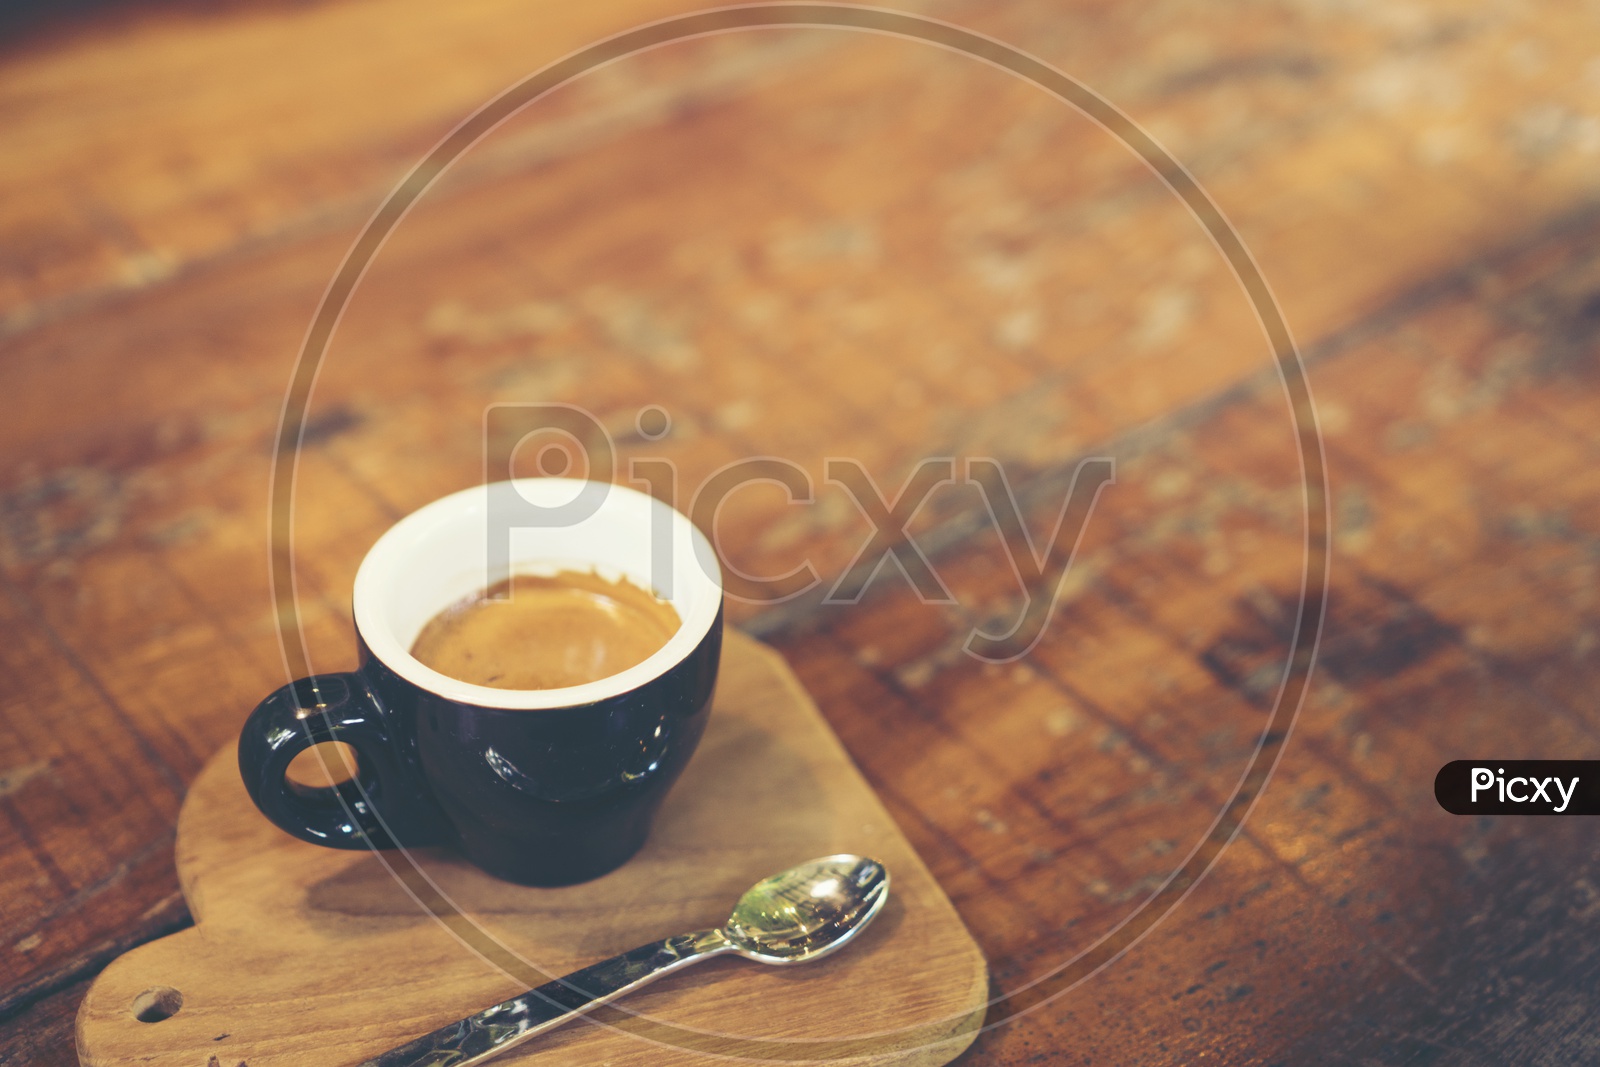 Espresso shot coffee in a black cup on a wooden tray